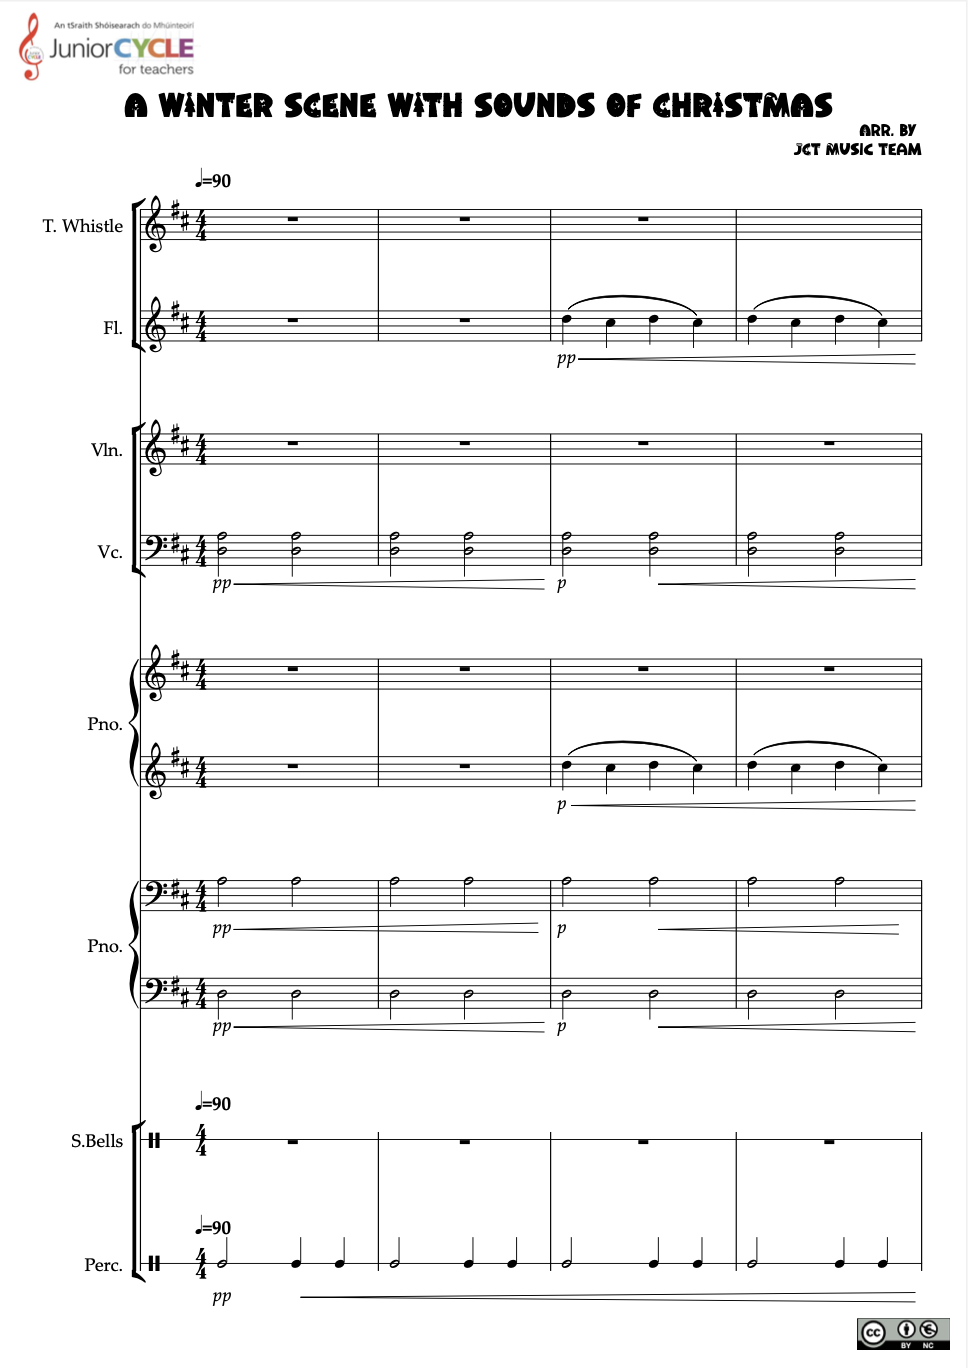 A Winter Scene with Sounds of Christmas - Score